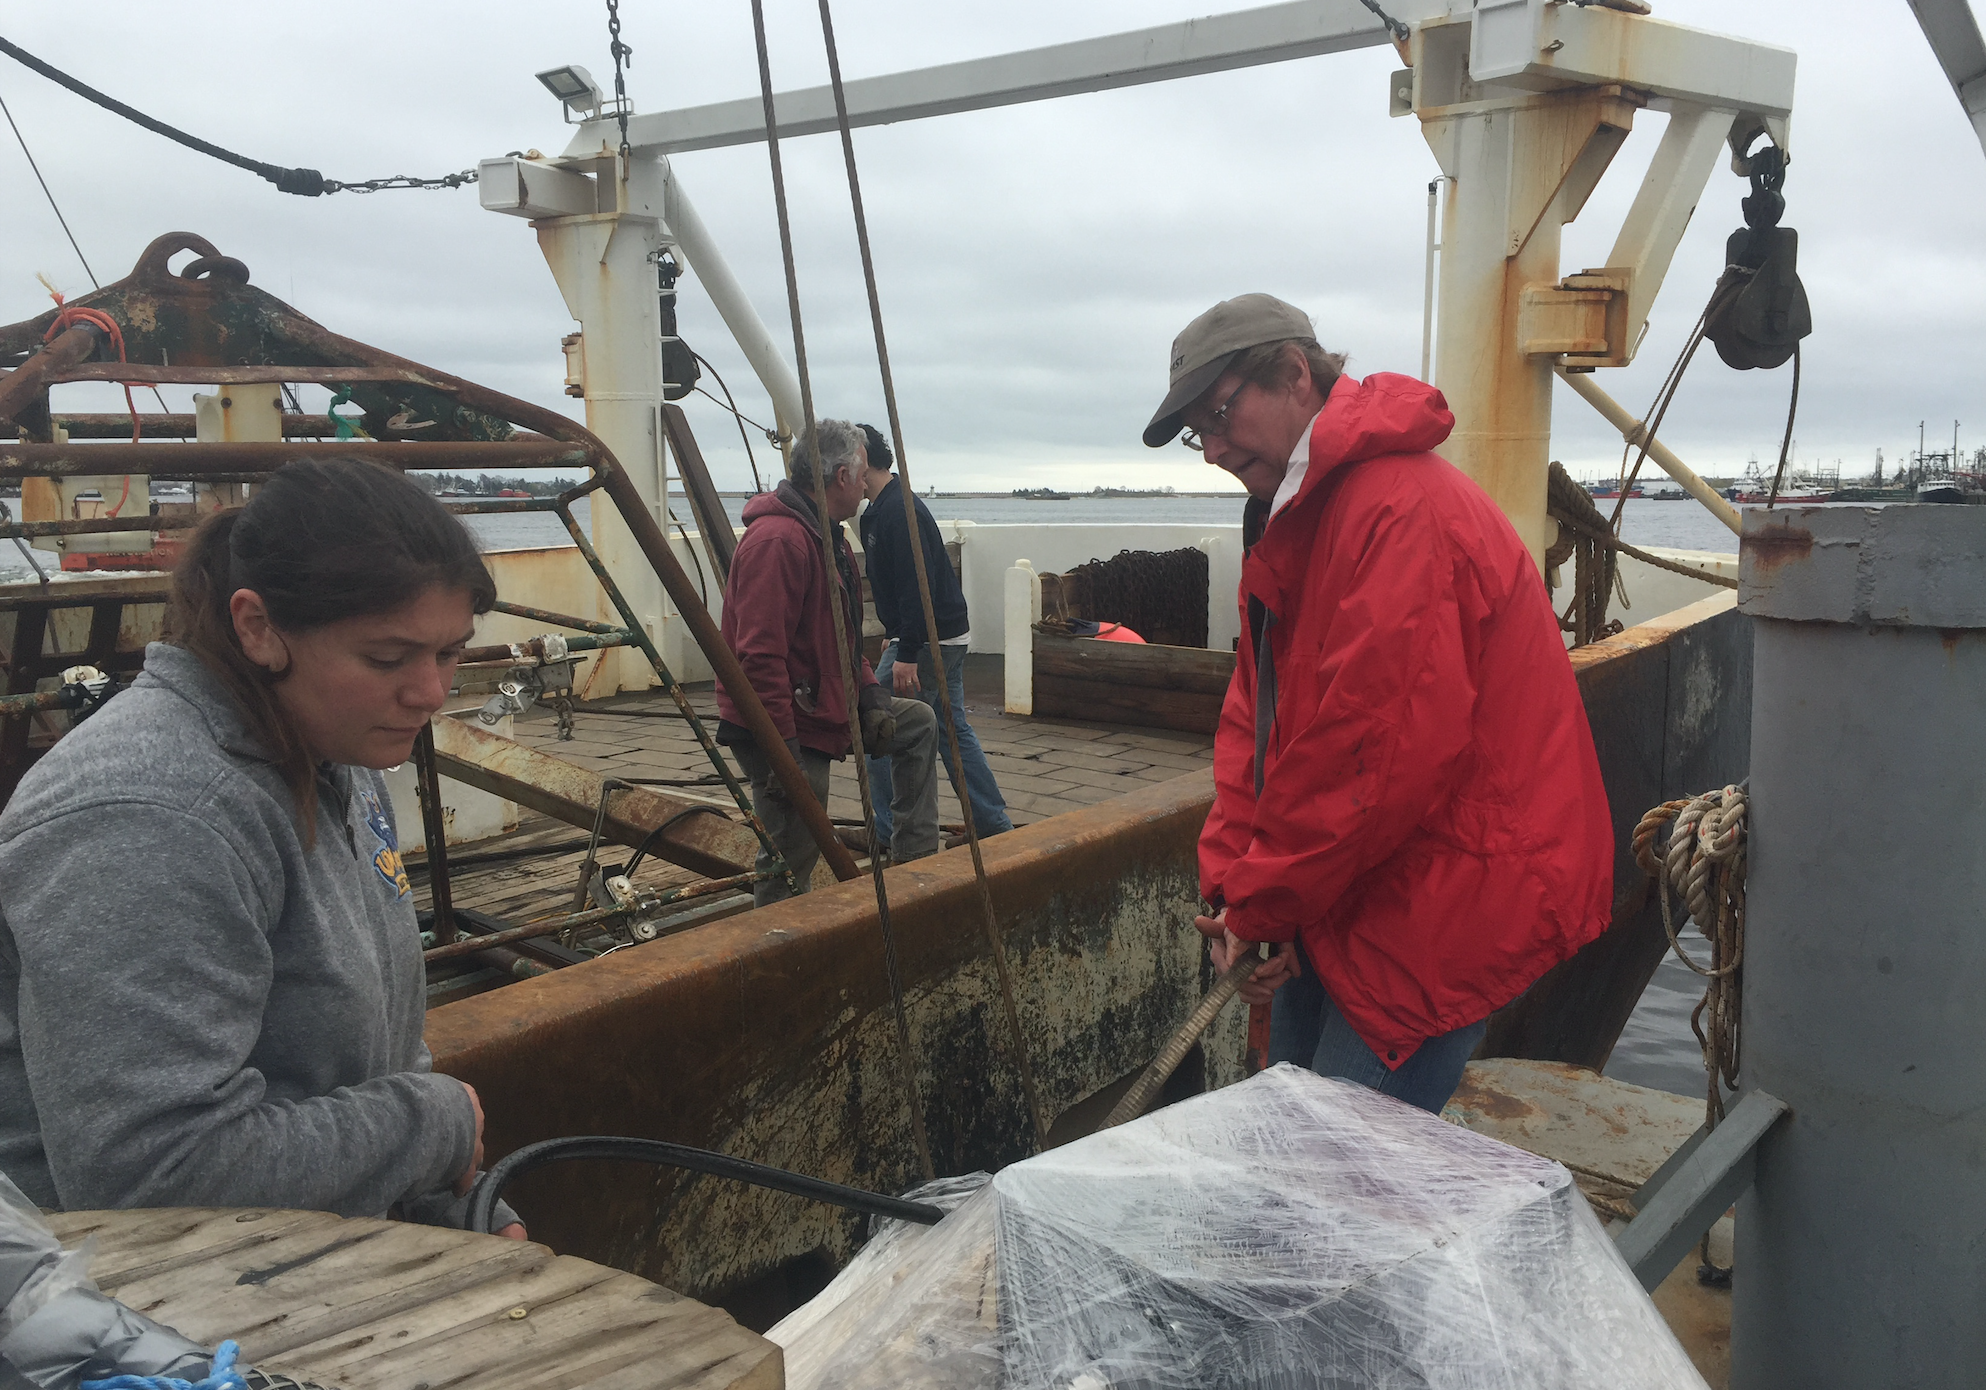 Dr. Kevin Stokebury, right, and his team on boat Liberty preparing for the last sea scallop survey before Vineyard Wind begins construction. Photo by Nadine Sebai for The Public's Radio